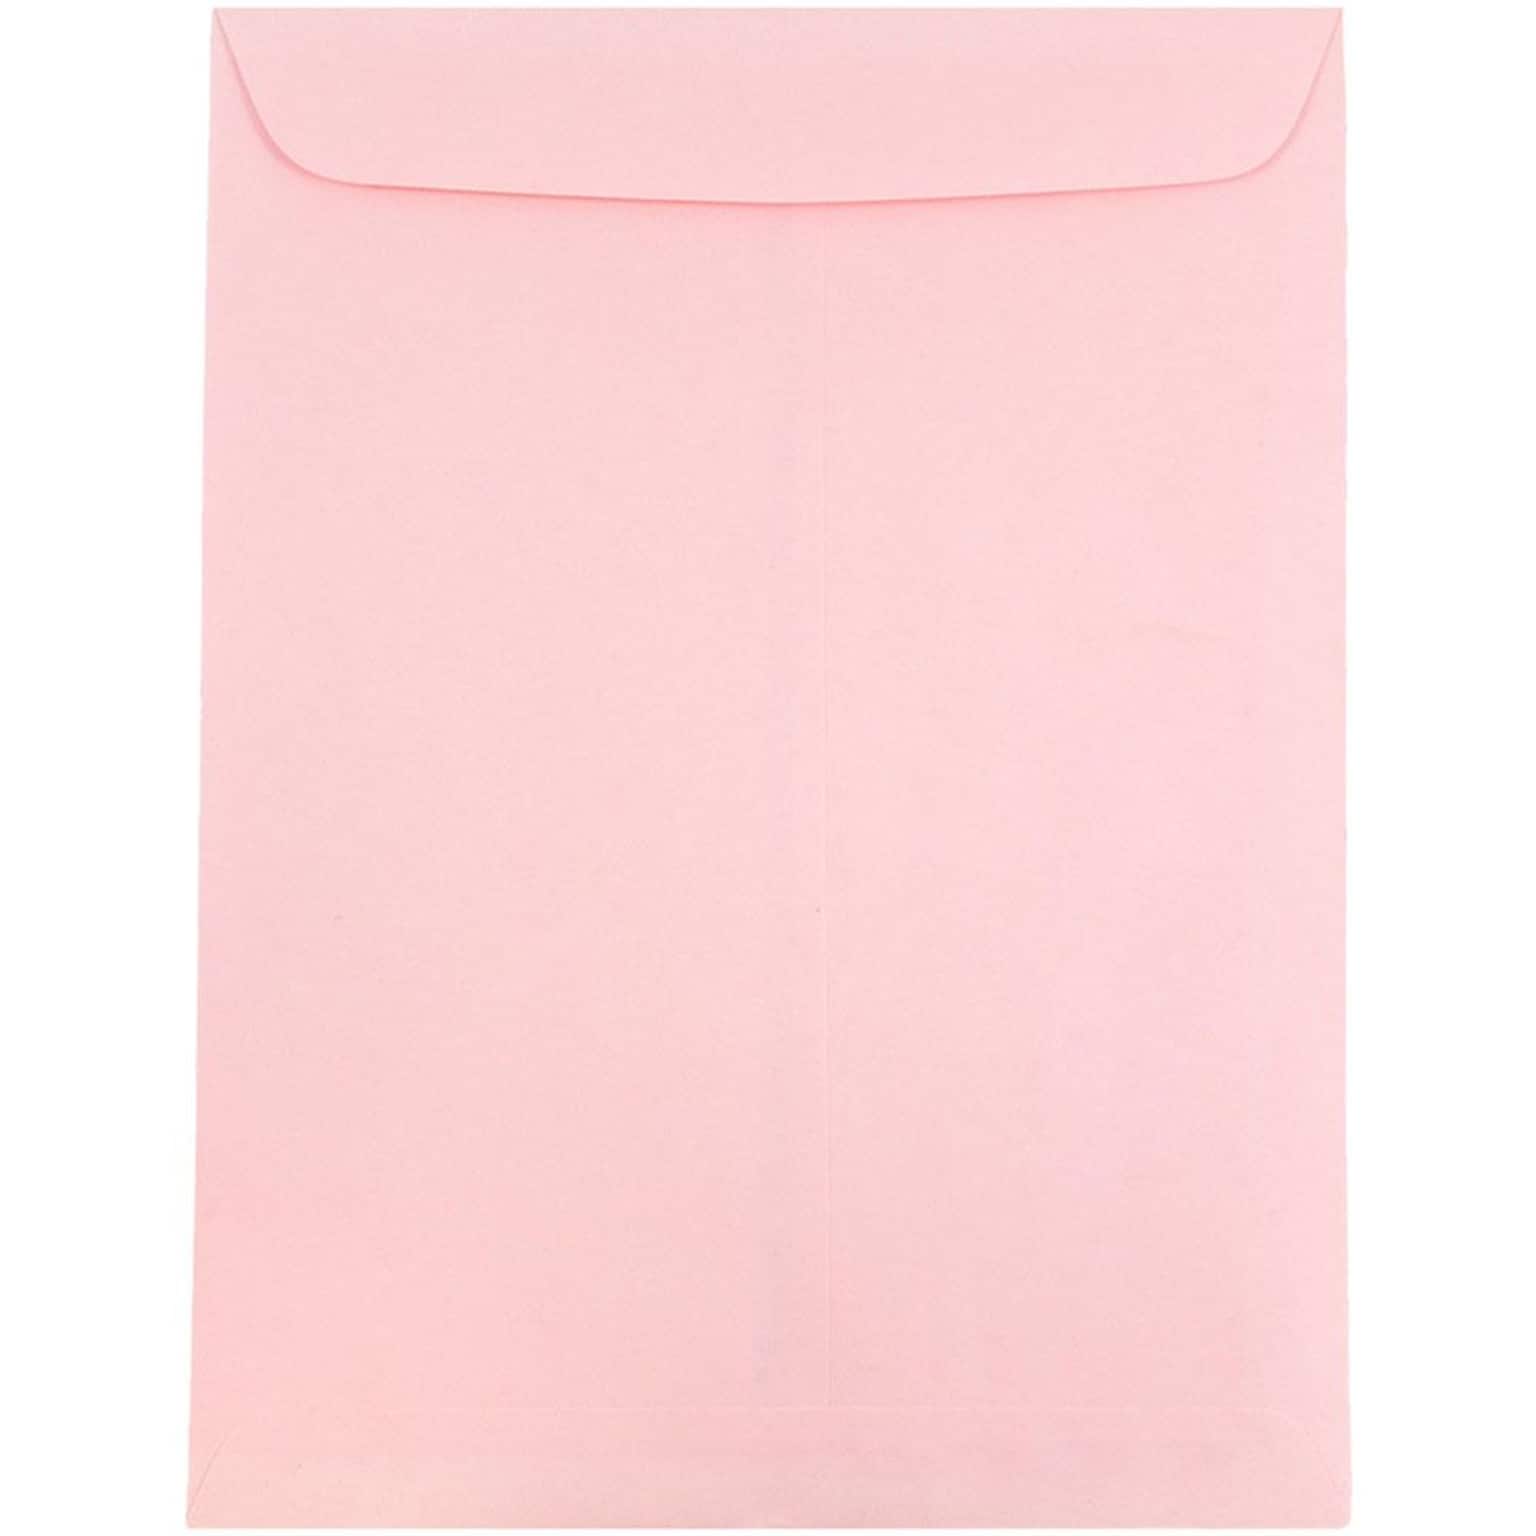 JAM Paper 9 x 12 Open End Catalog Envelopes, Baby Pink, 25/Pack (312812930a)